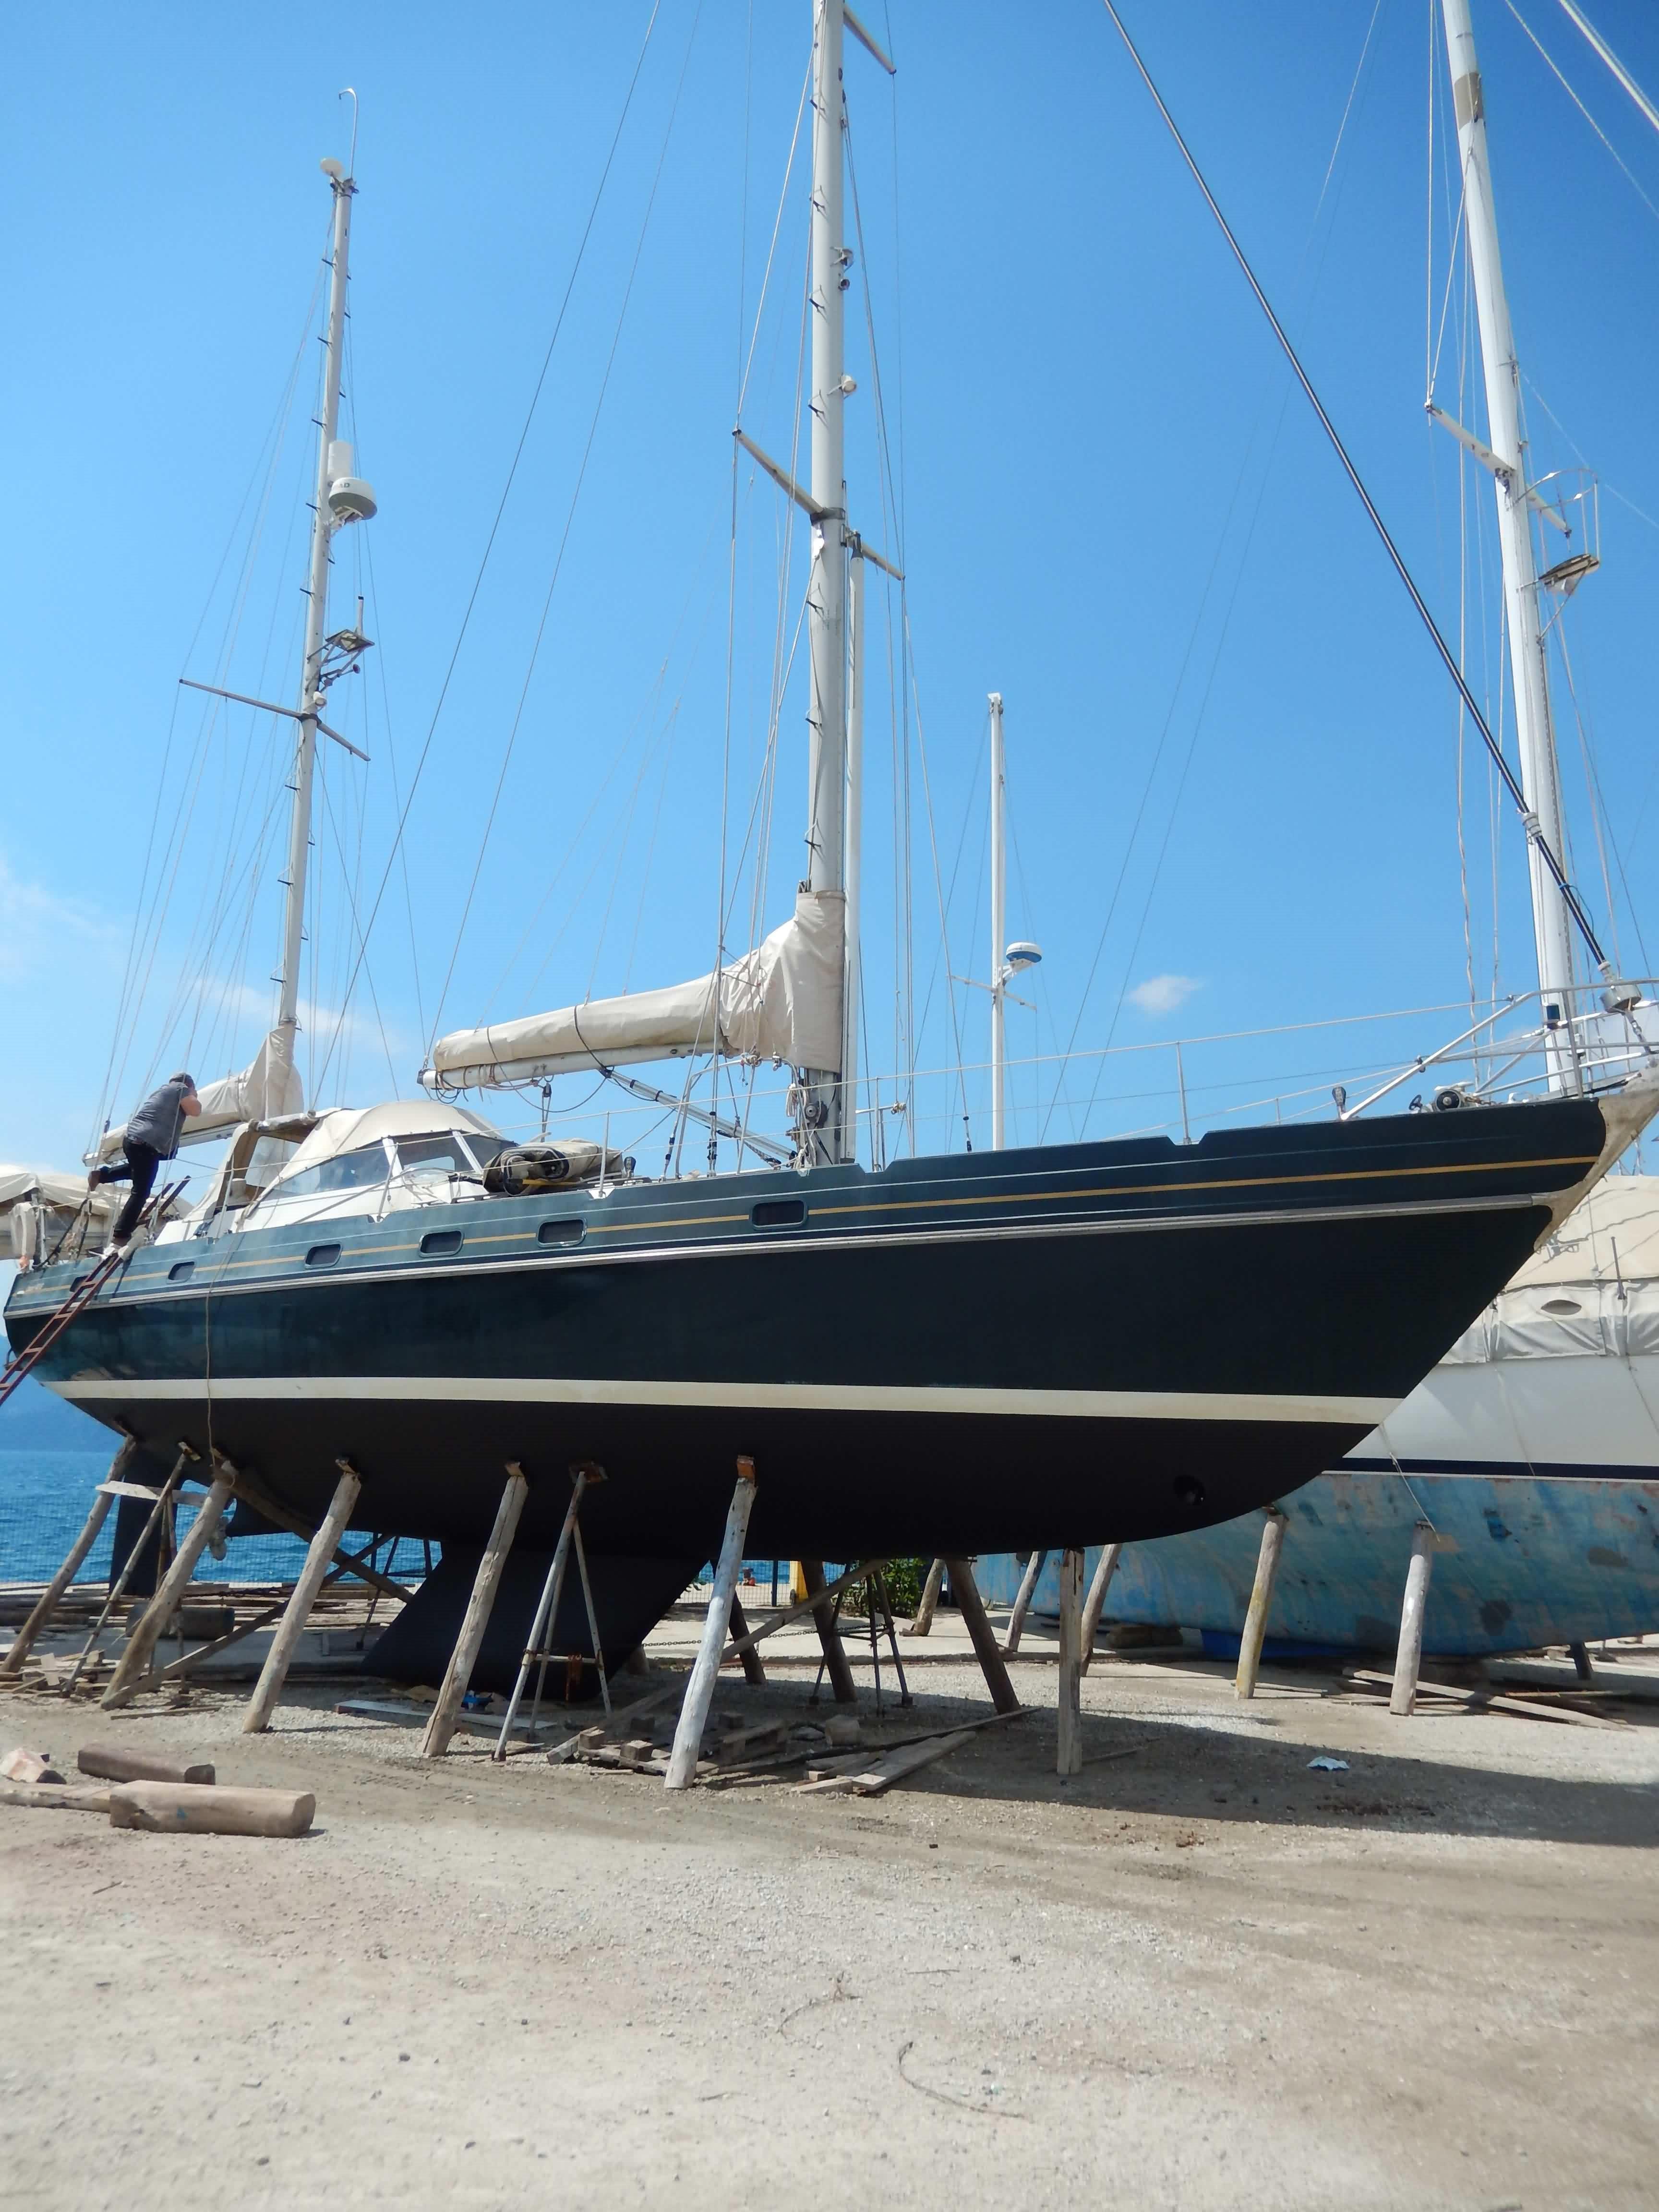 Contest CONTEST 48 S Ketch Boat For Sale